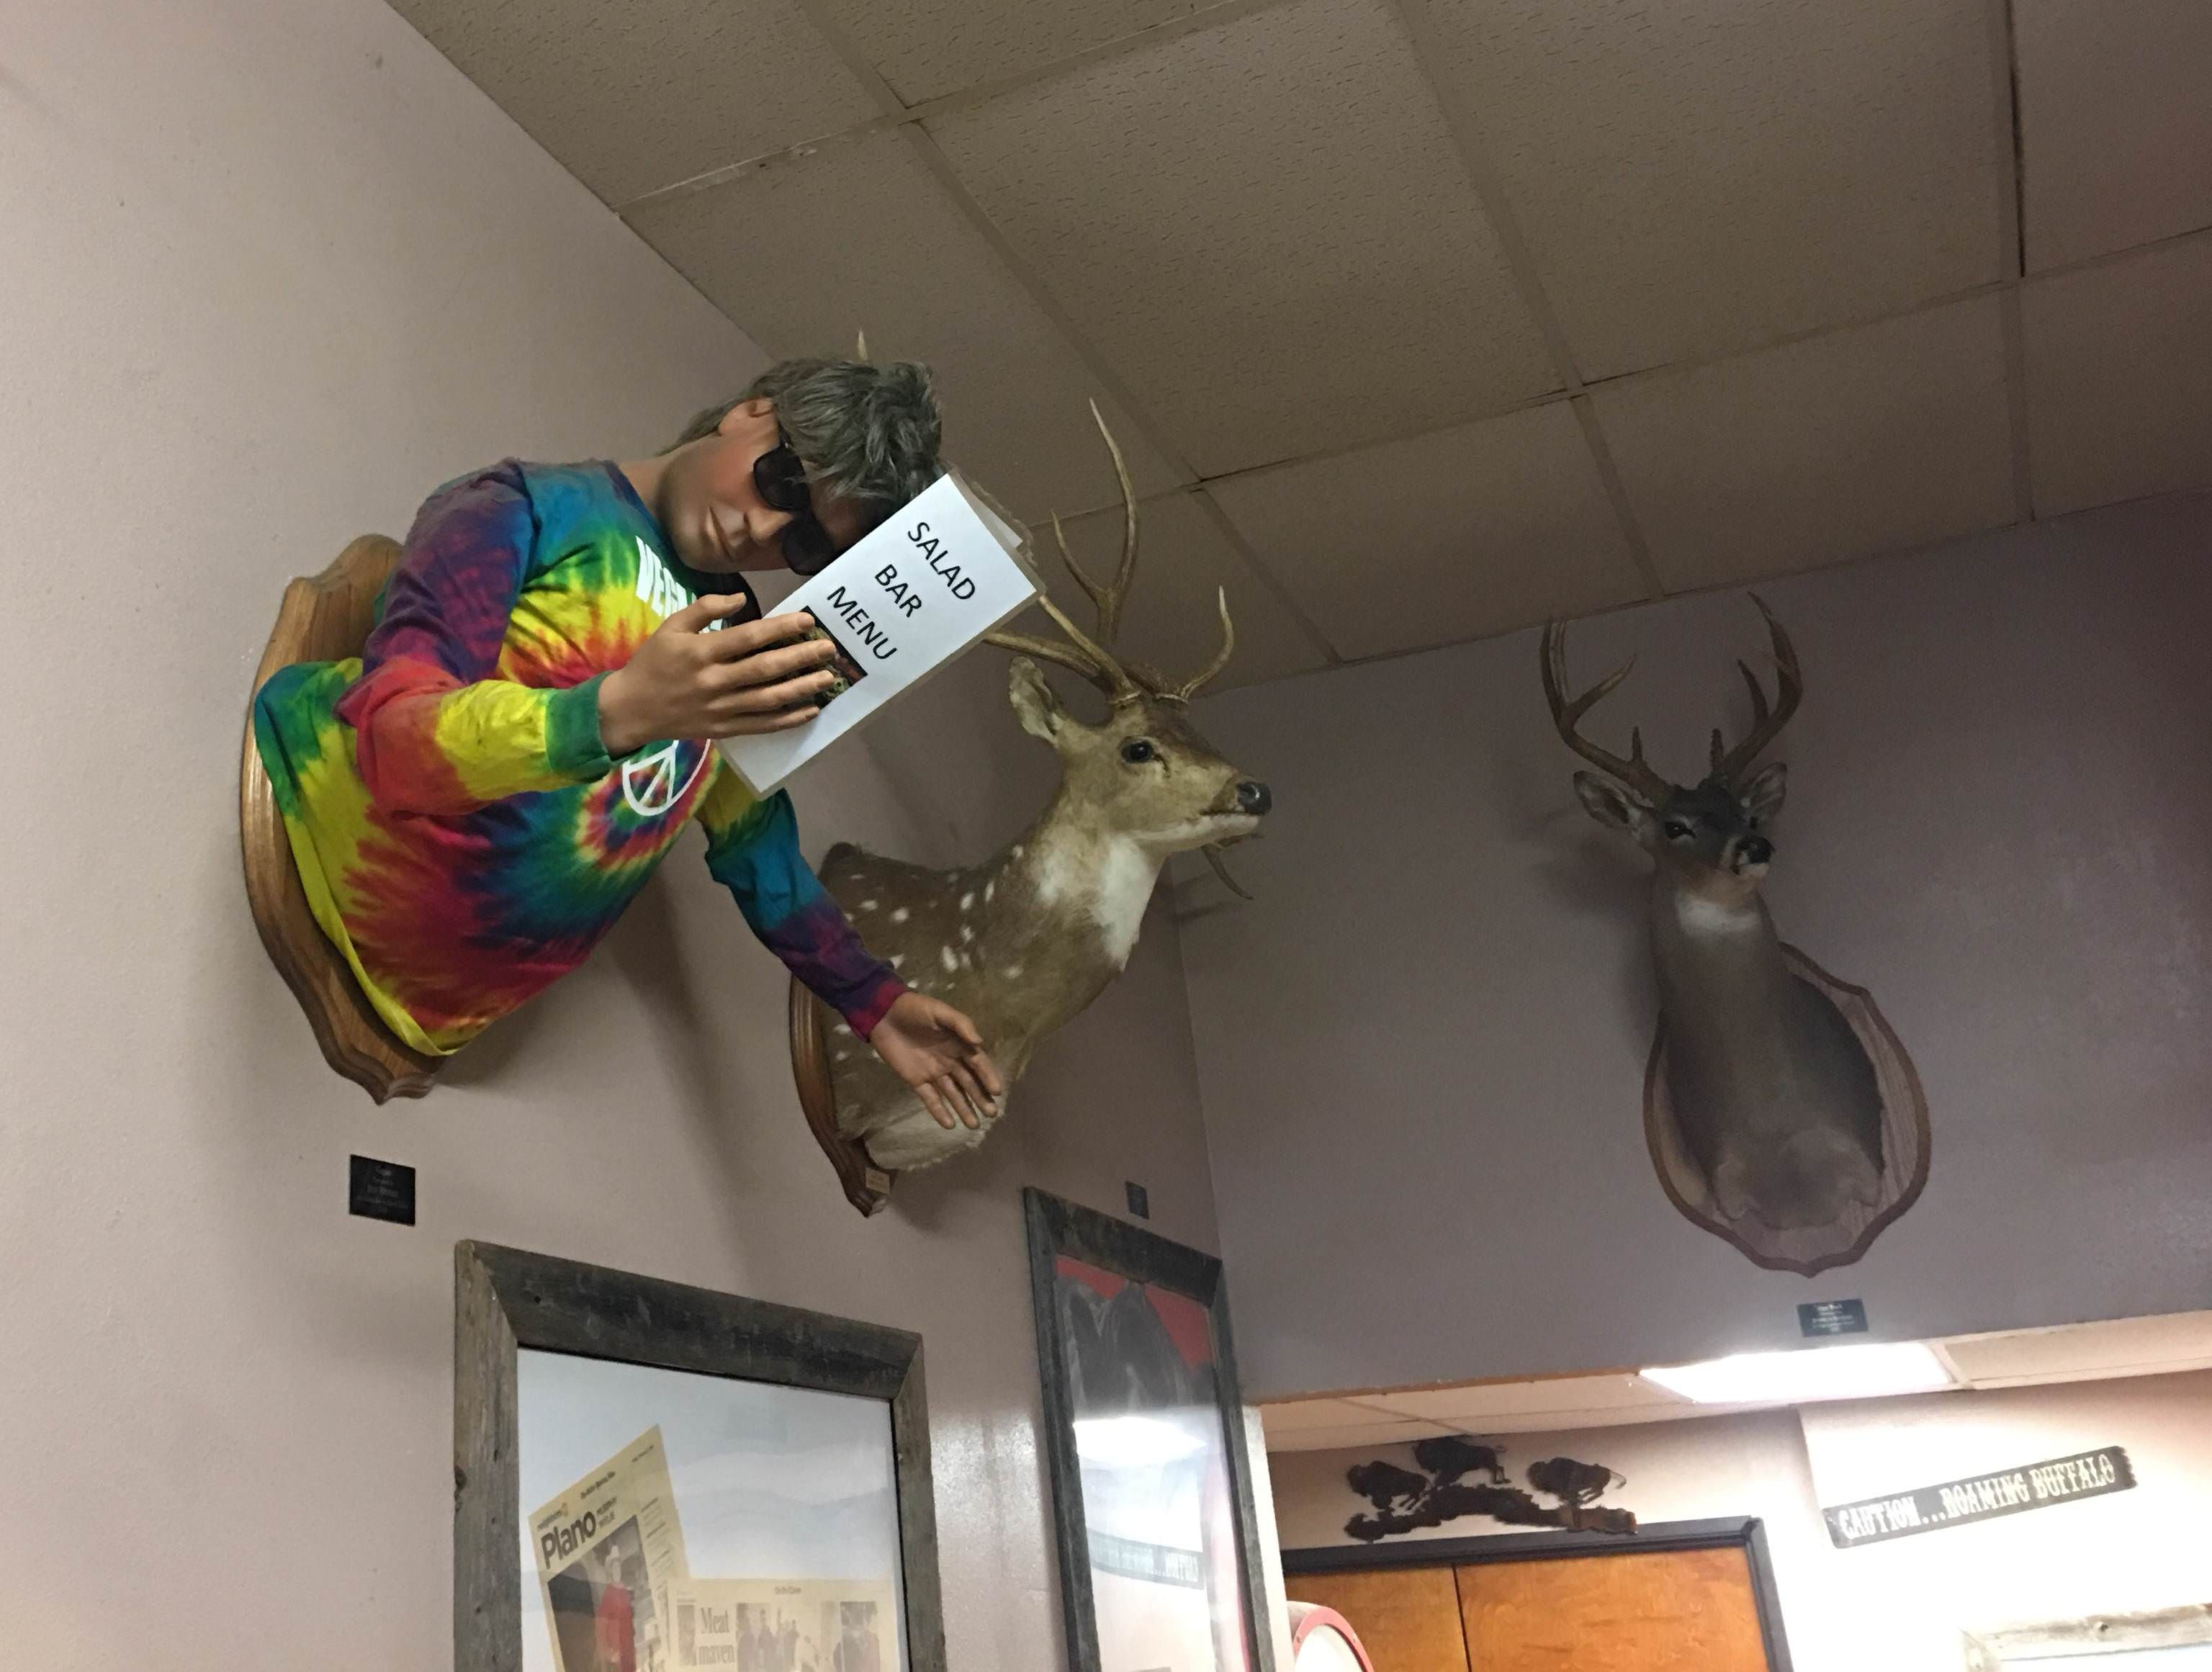 They mounted a vegan to the wall at my local butcher shop.